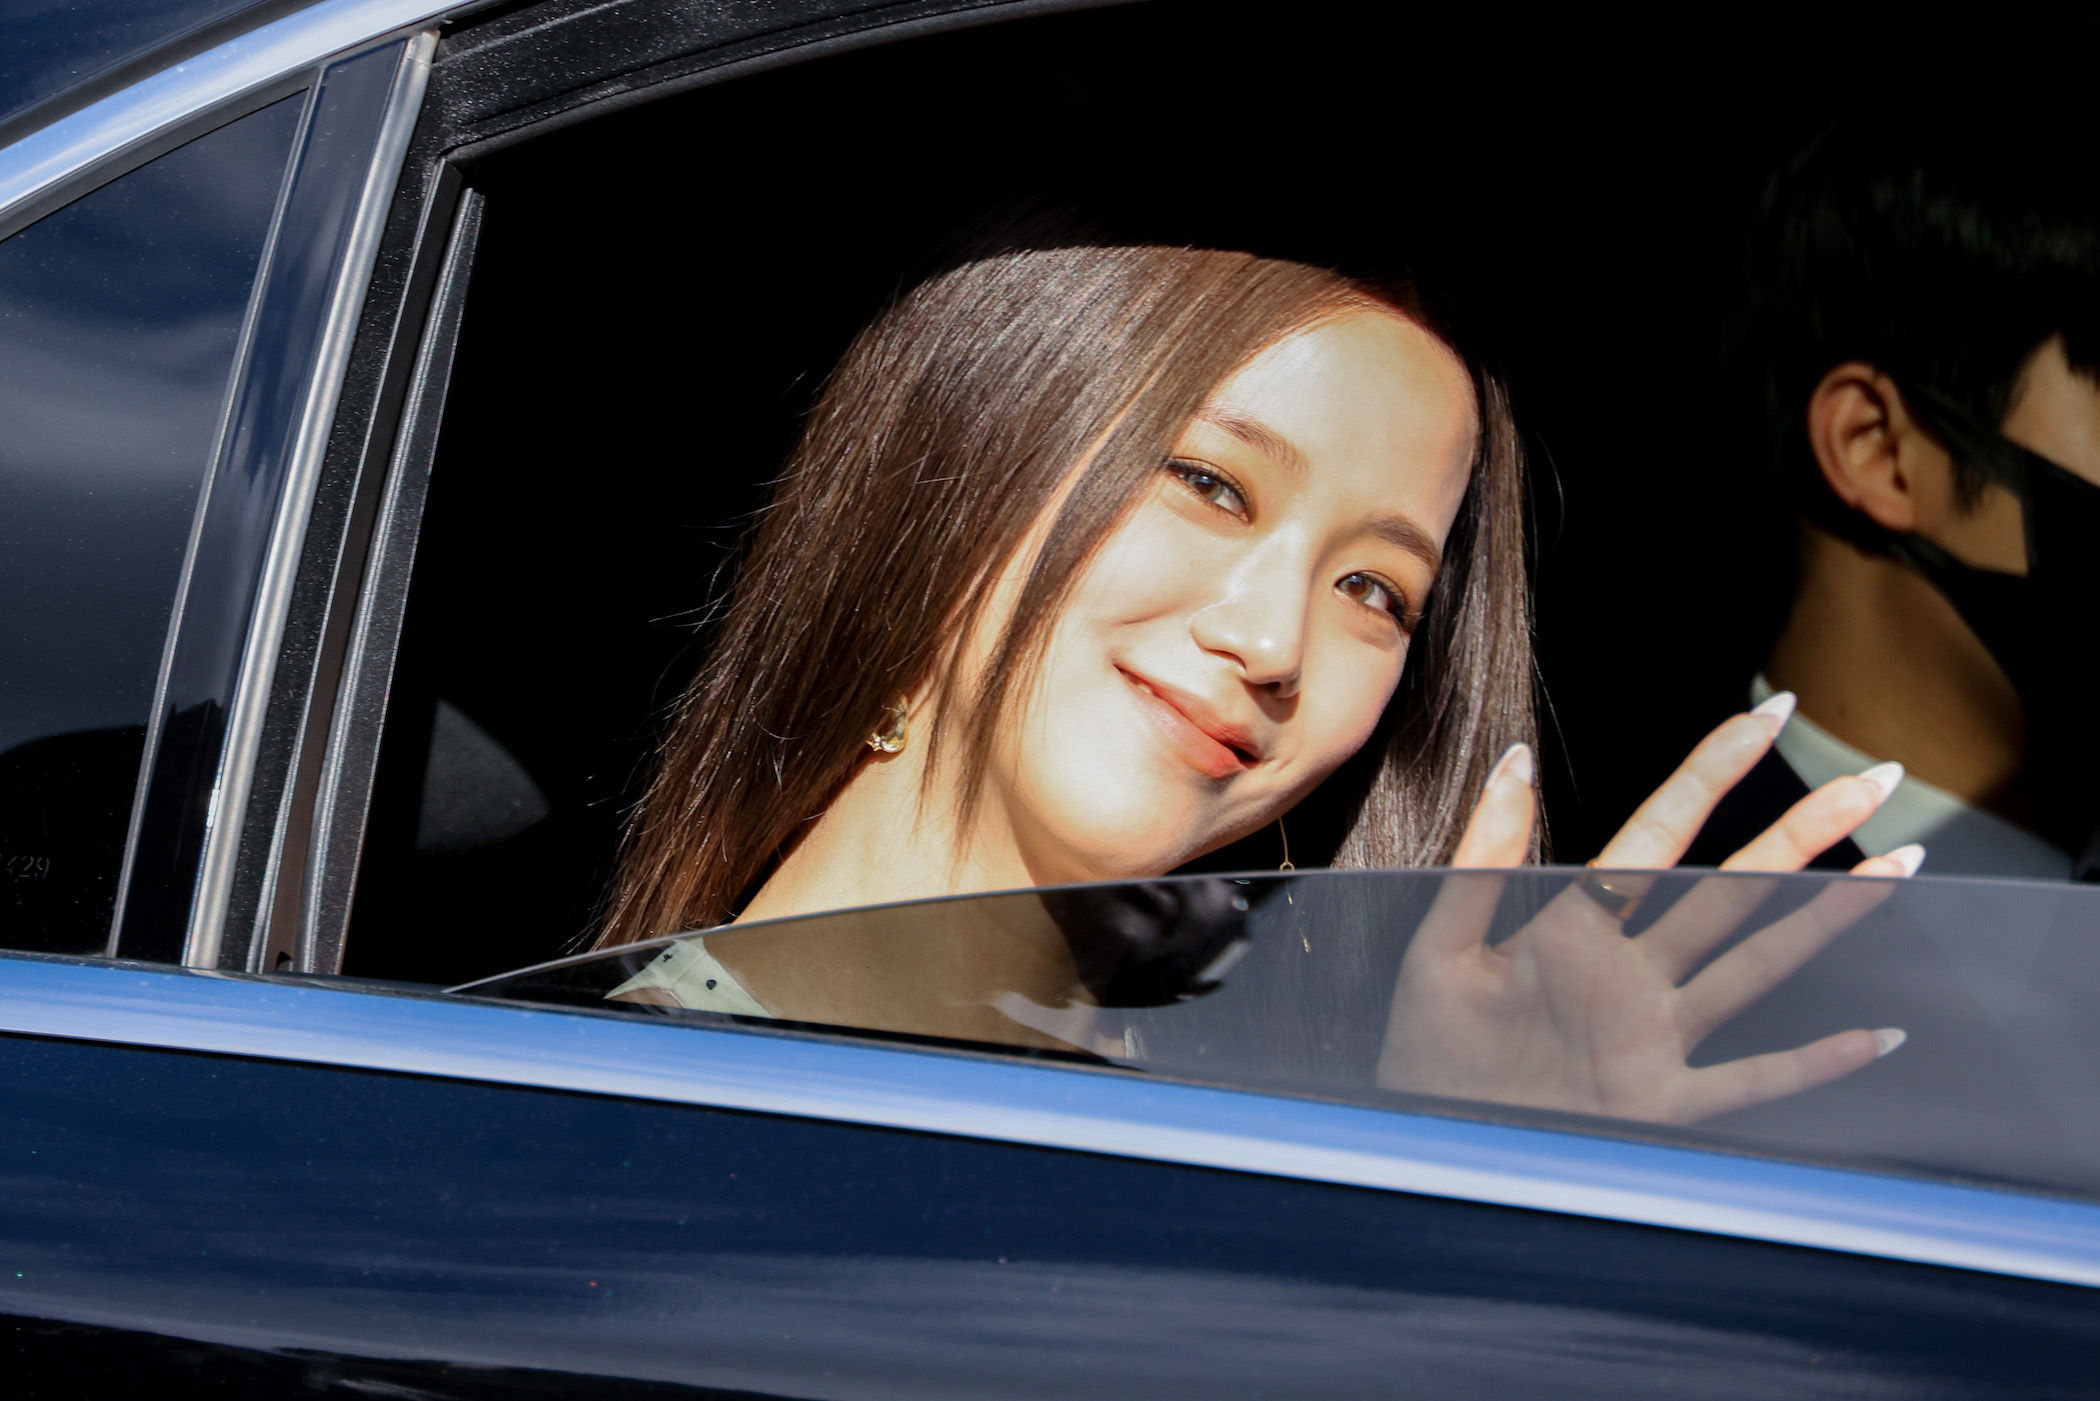 blackpink's-jisoo-shares-her-skincare-routine-for-her-ethereal-glowing-skin